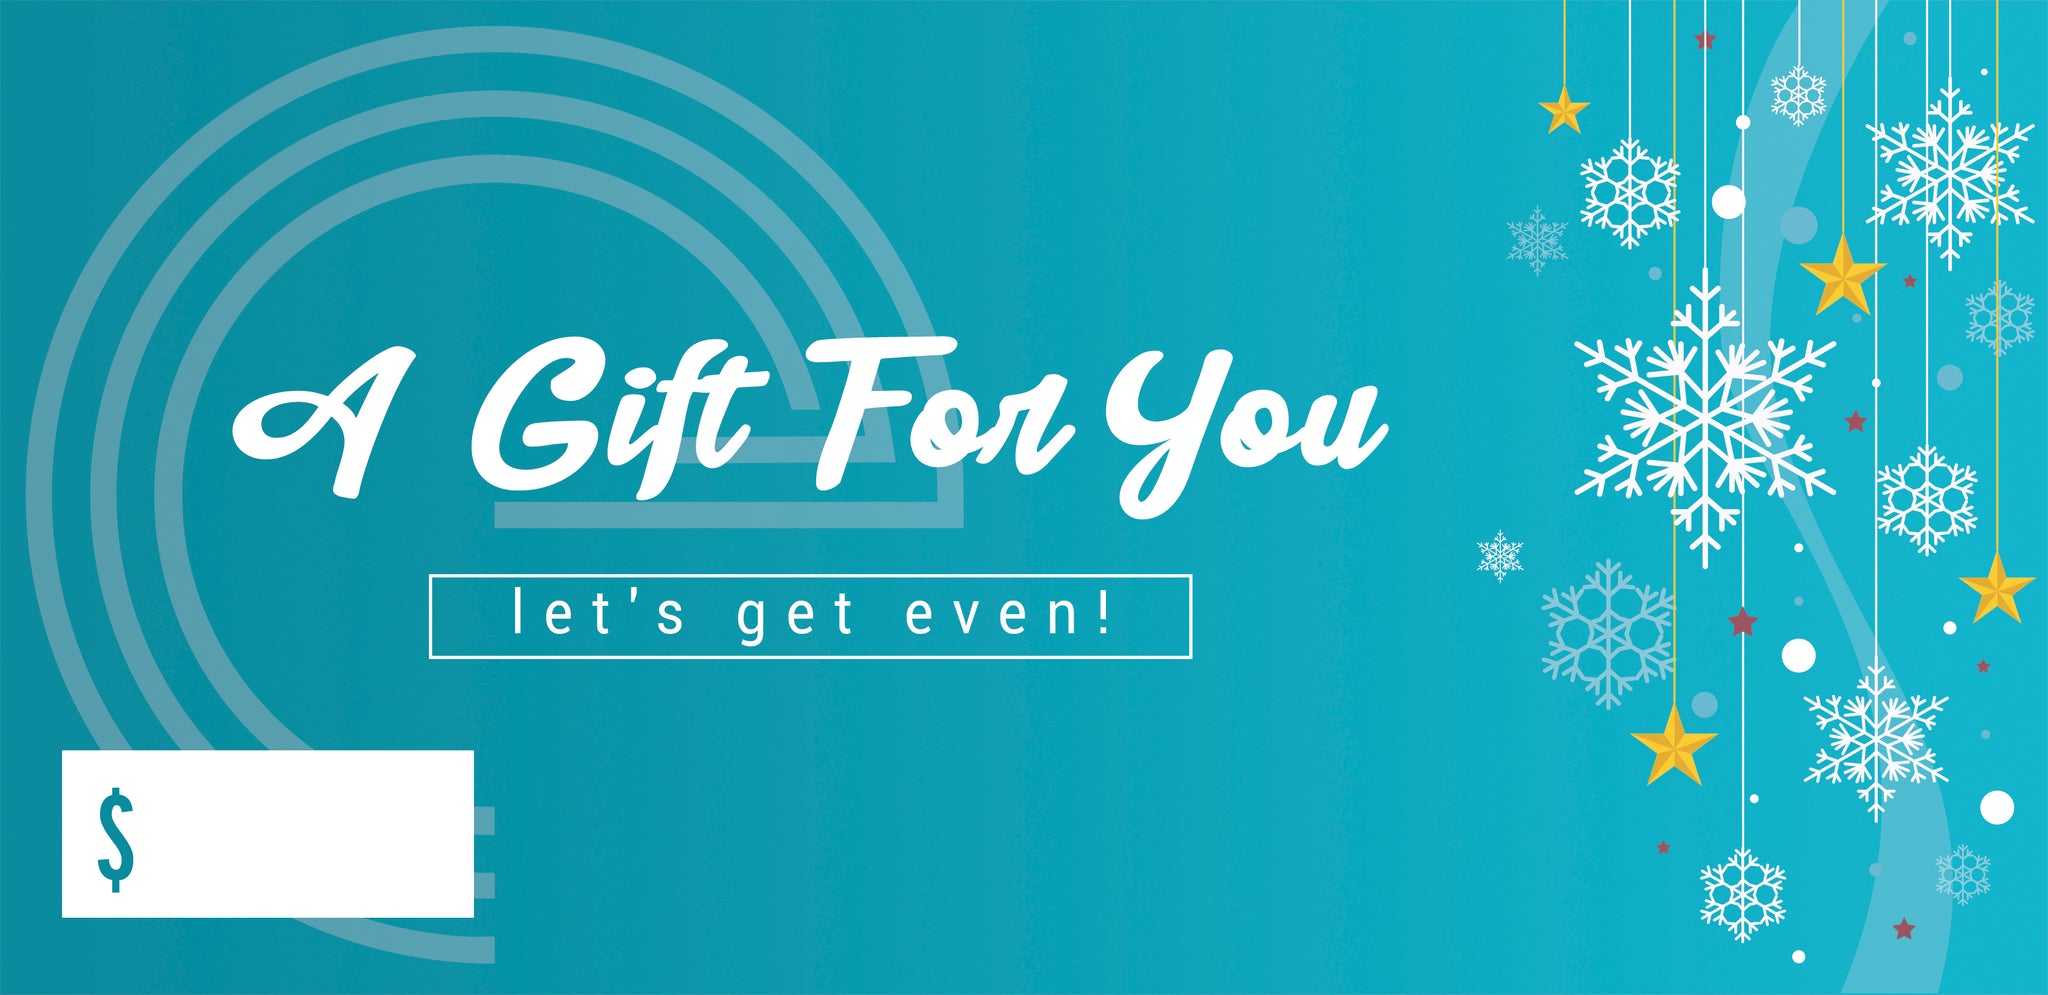 The front of the gift certificate, which is teal blue with white snowflakes and has "A gift for you" and "let's get even!" written on them. There is a blank space for the amount of the voucher to be written in. 